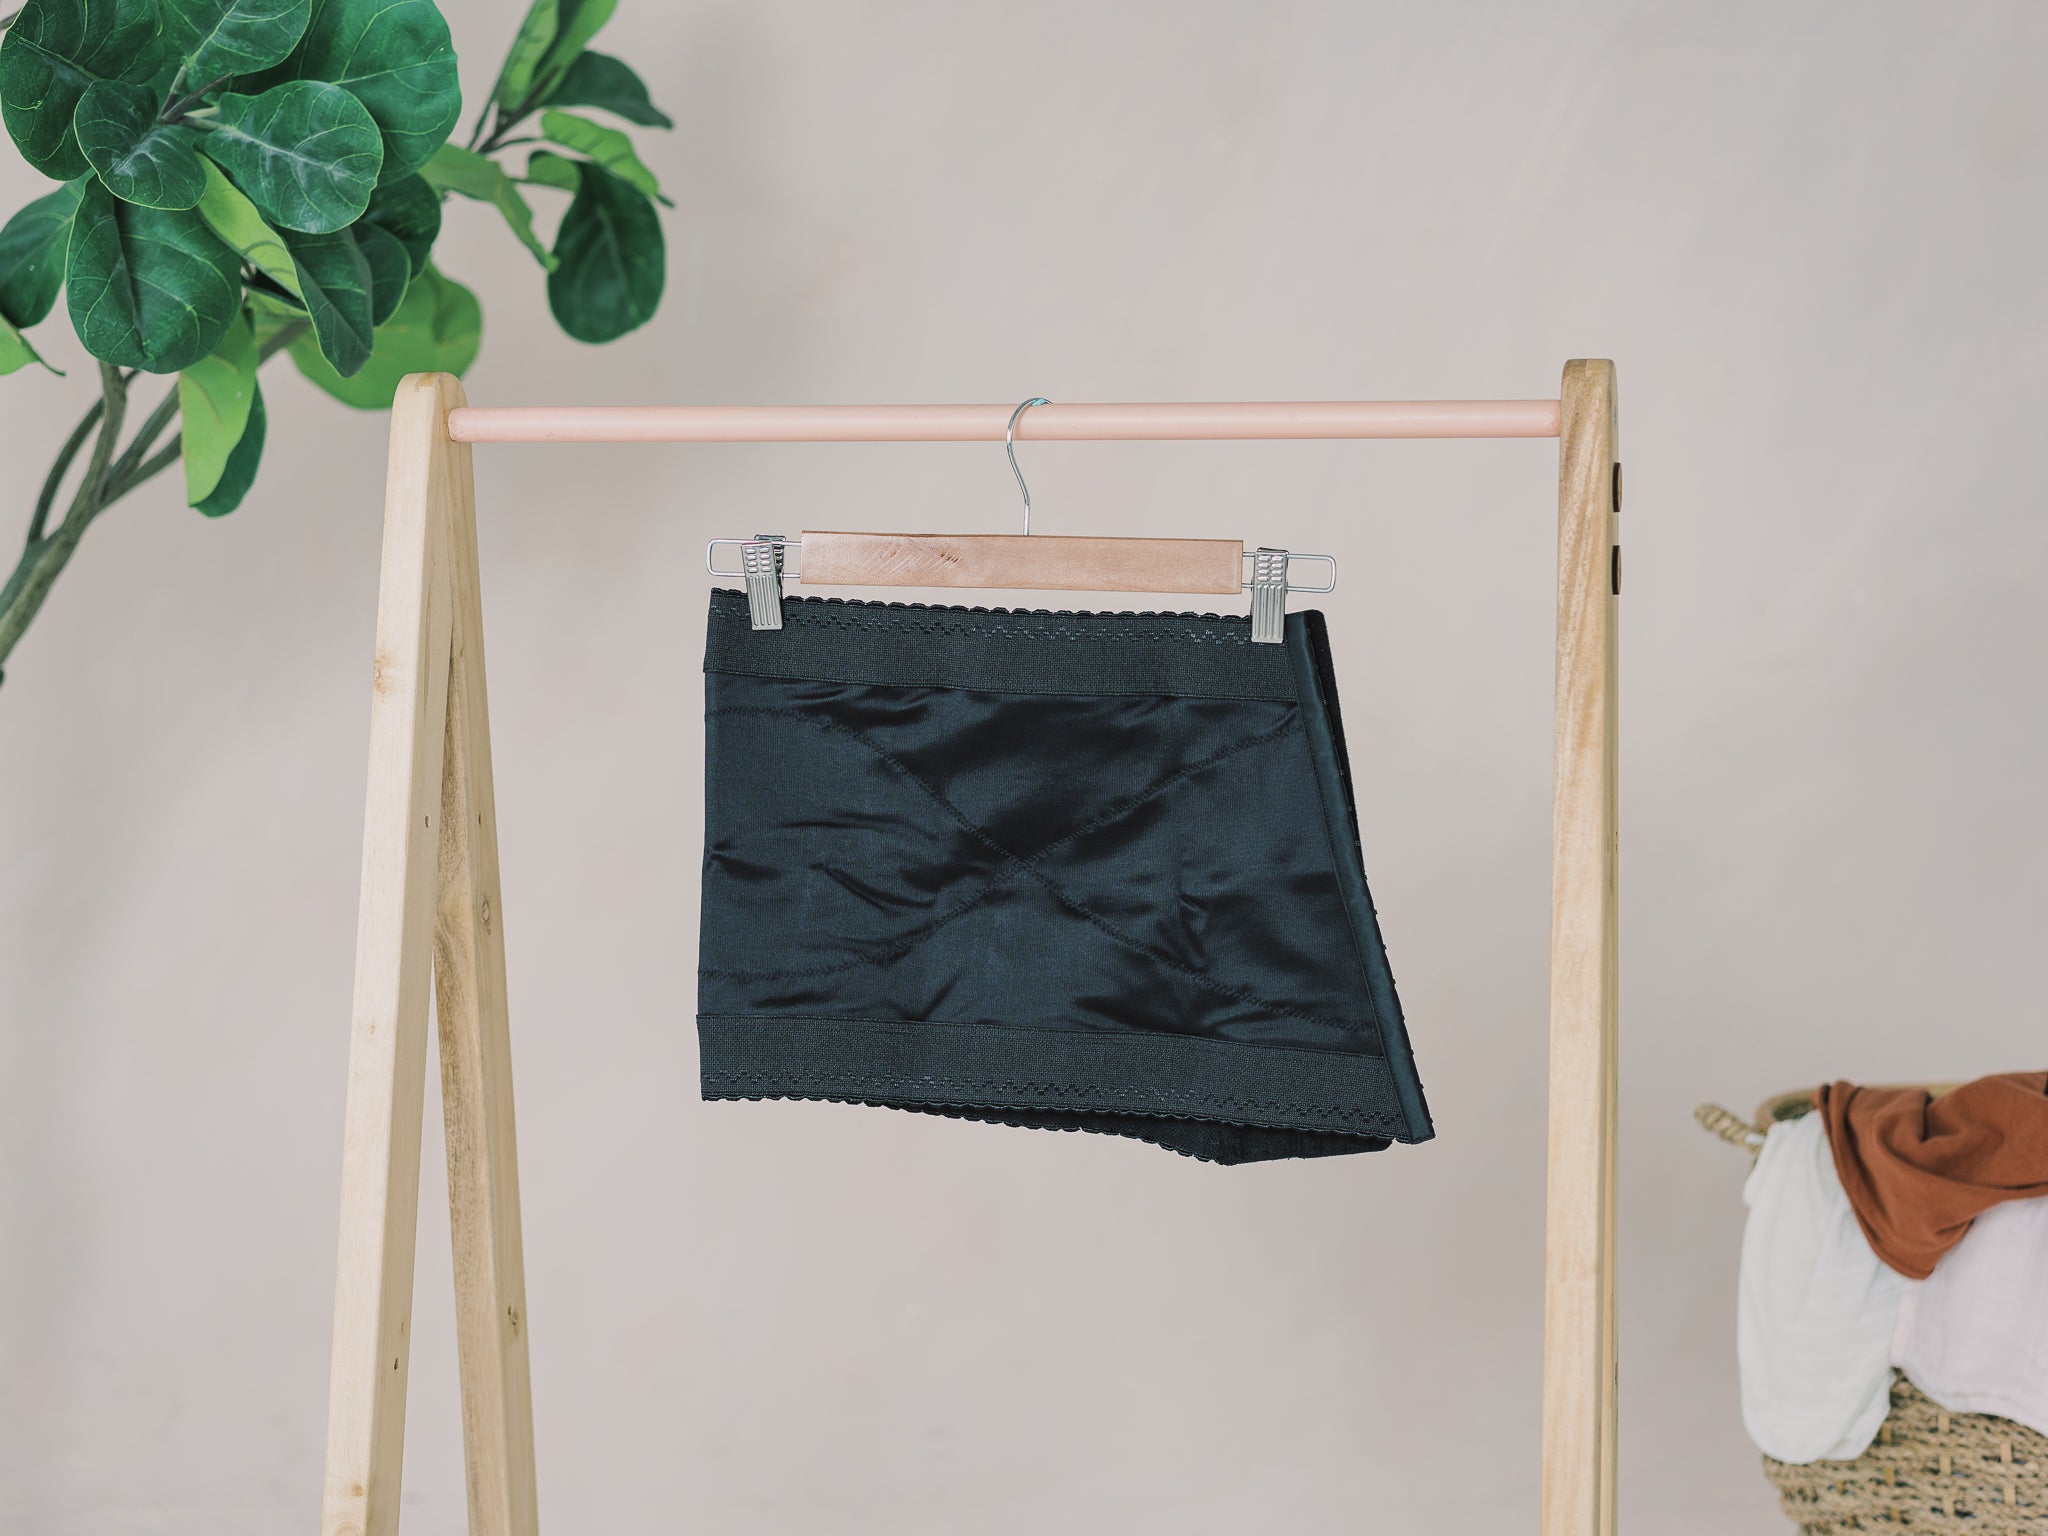 How to wear the Wink Shapewear / binder ng Urban Essentials 